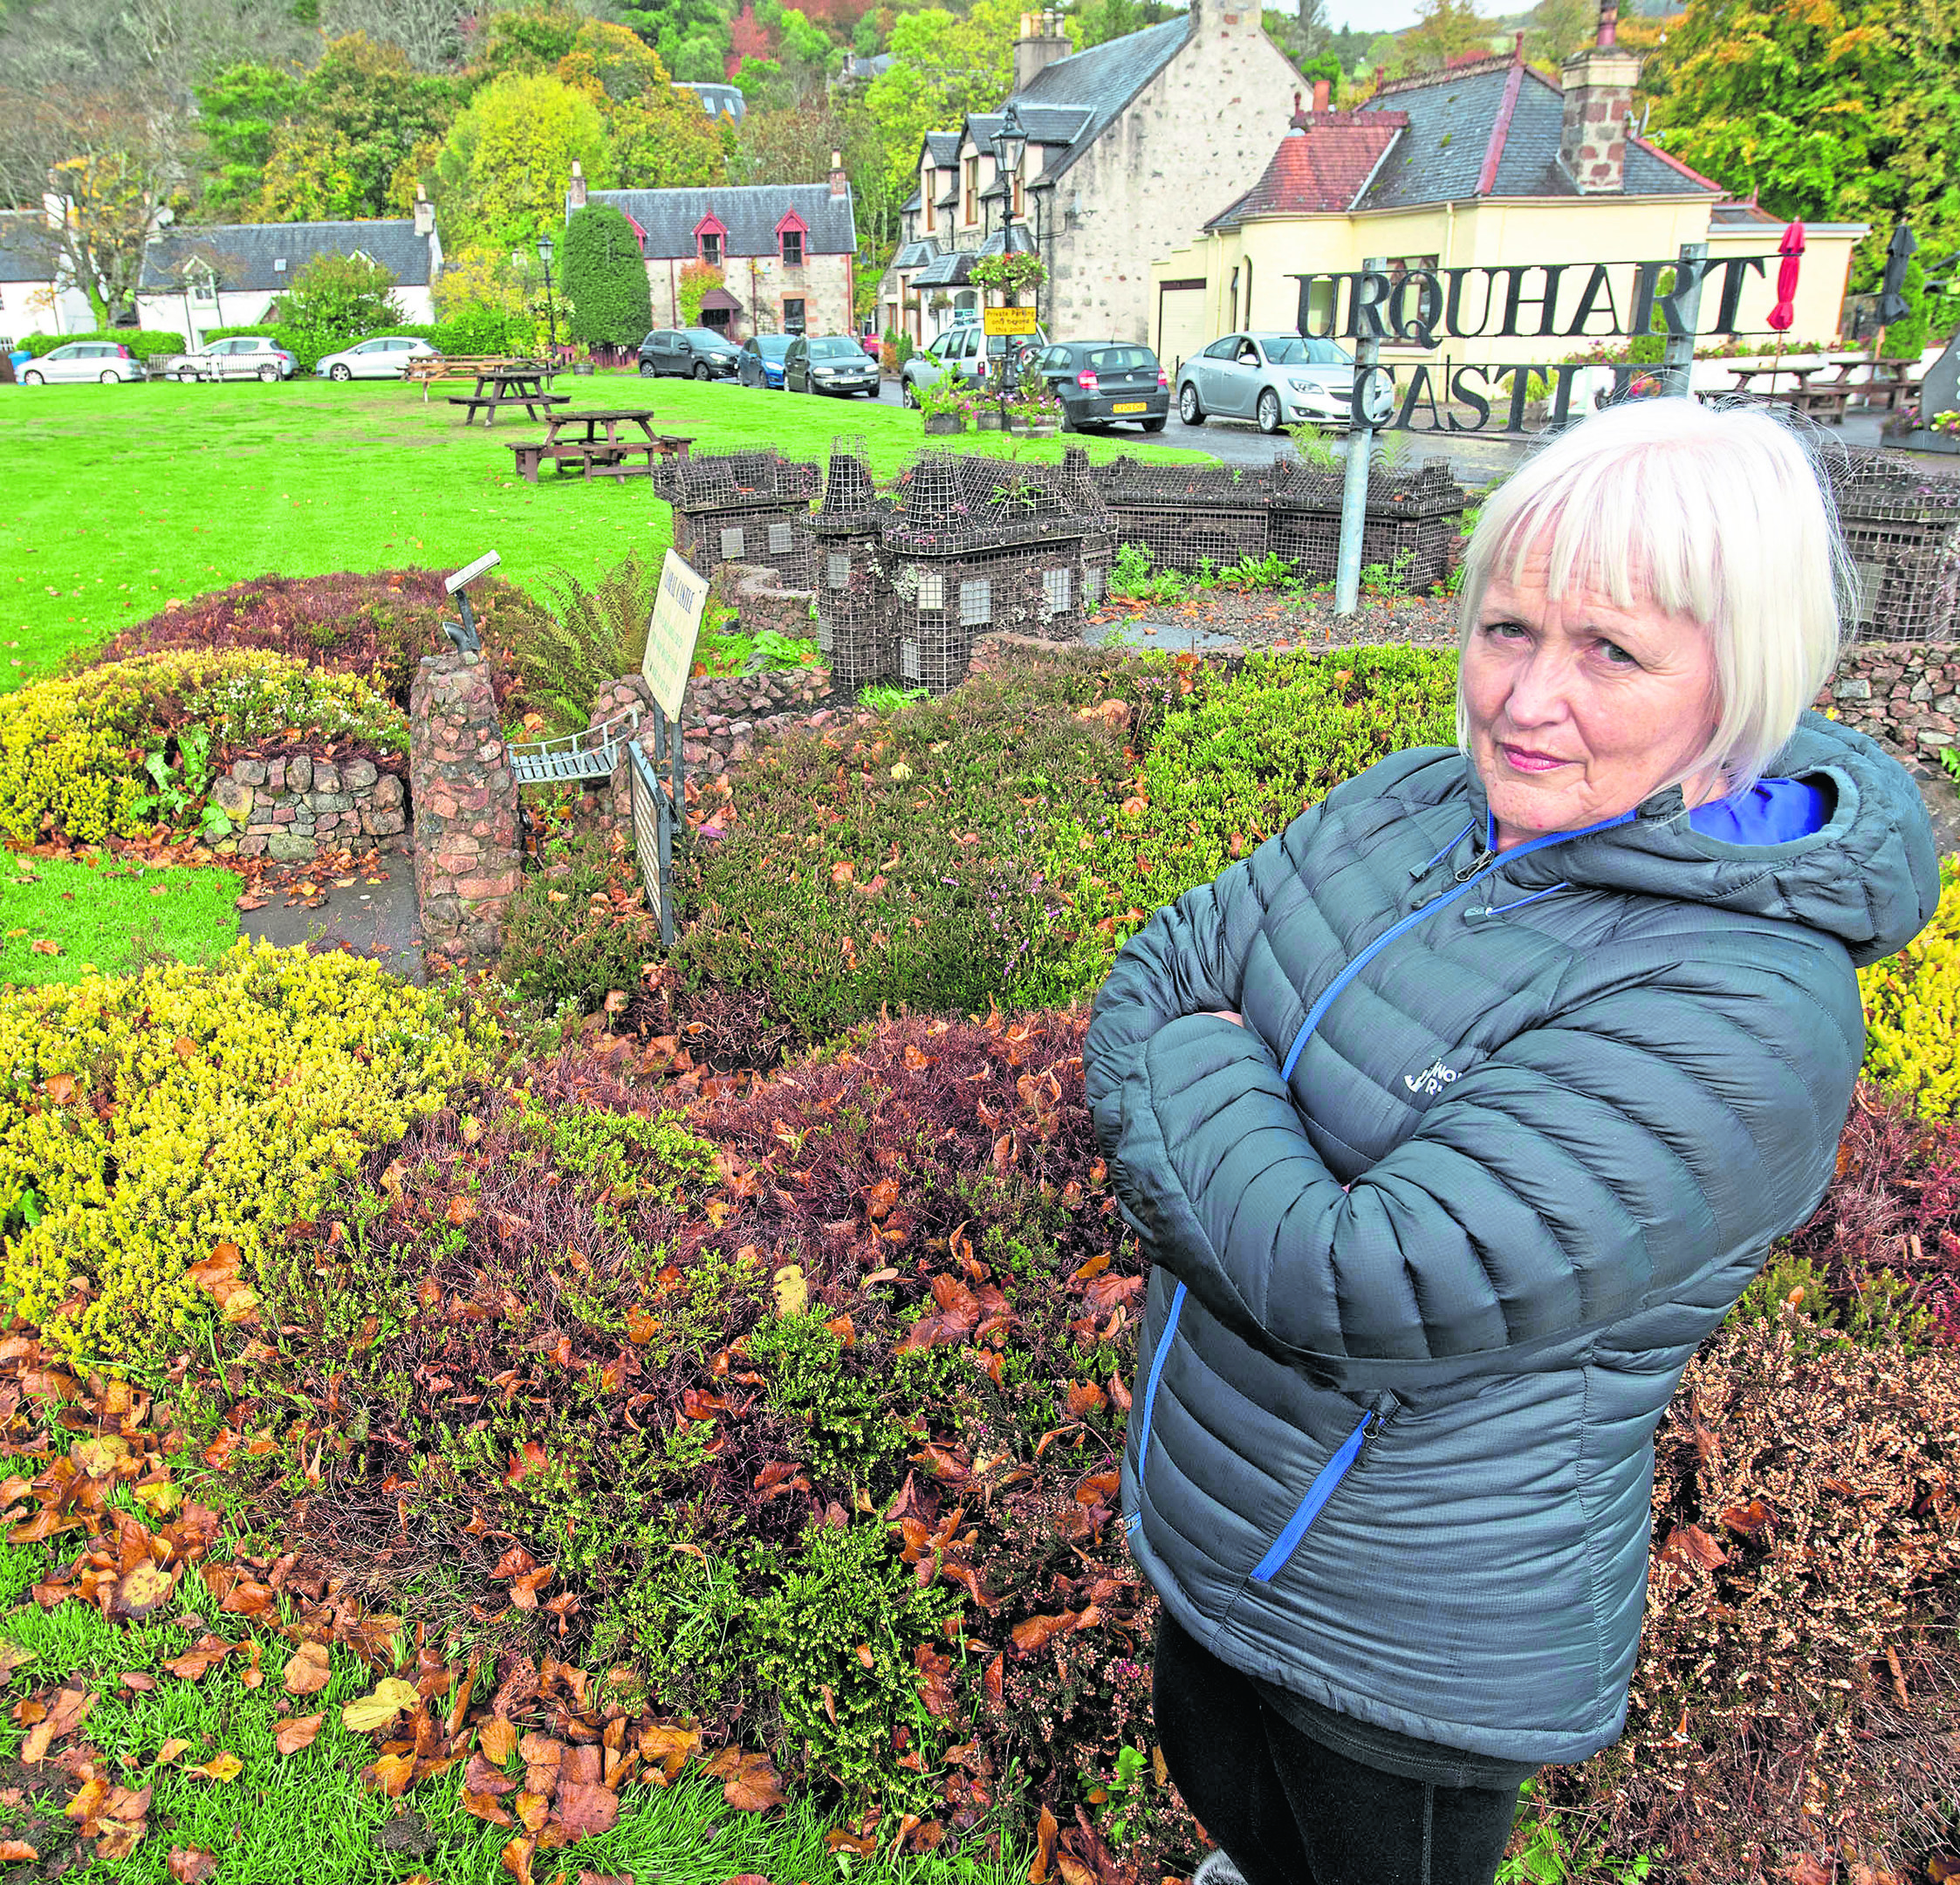 Local businesswoman and member of the local community council, Fiona Urquhart at the site where the Christmas Tree normally sits.